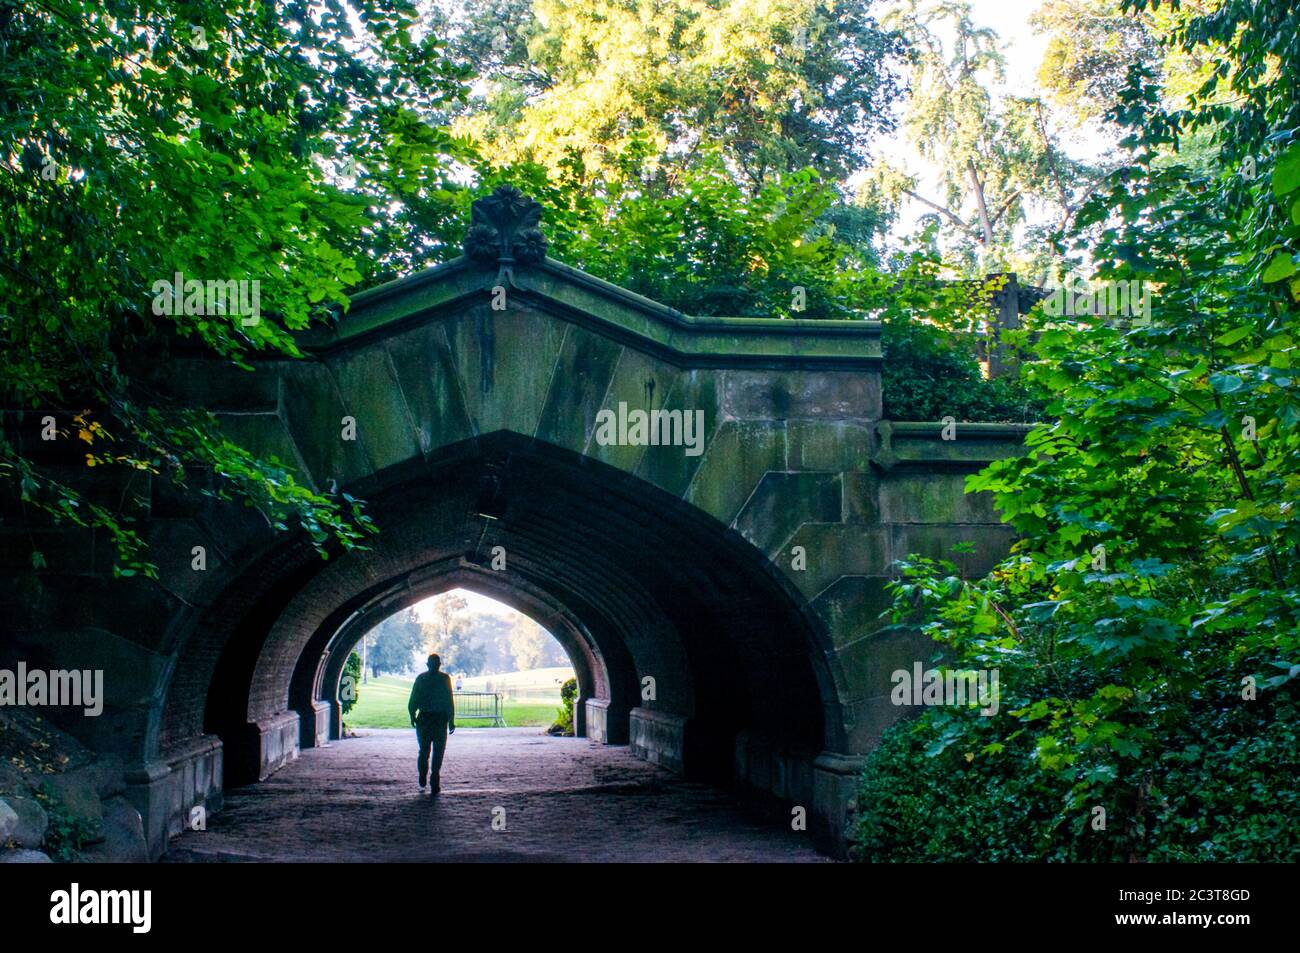 Entrance to Prospect Park in Brooklyn, New York, USA. Prospect Park is a park of 237 hectares, located in Brooklyn. It has a 36-acre meadow called Lon Stock Photo